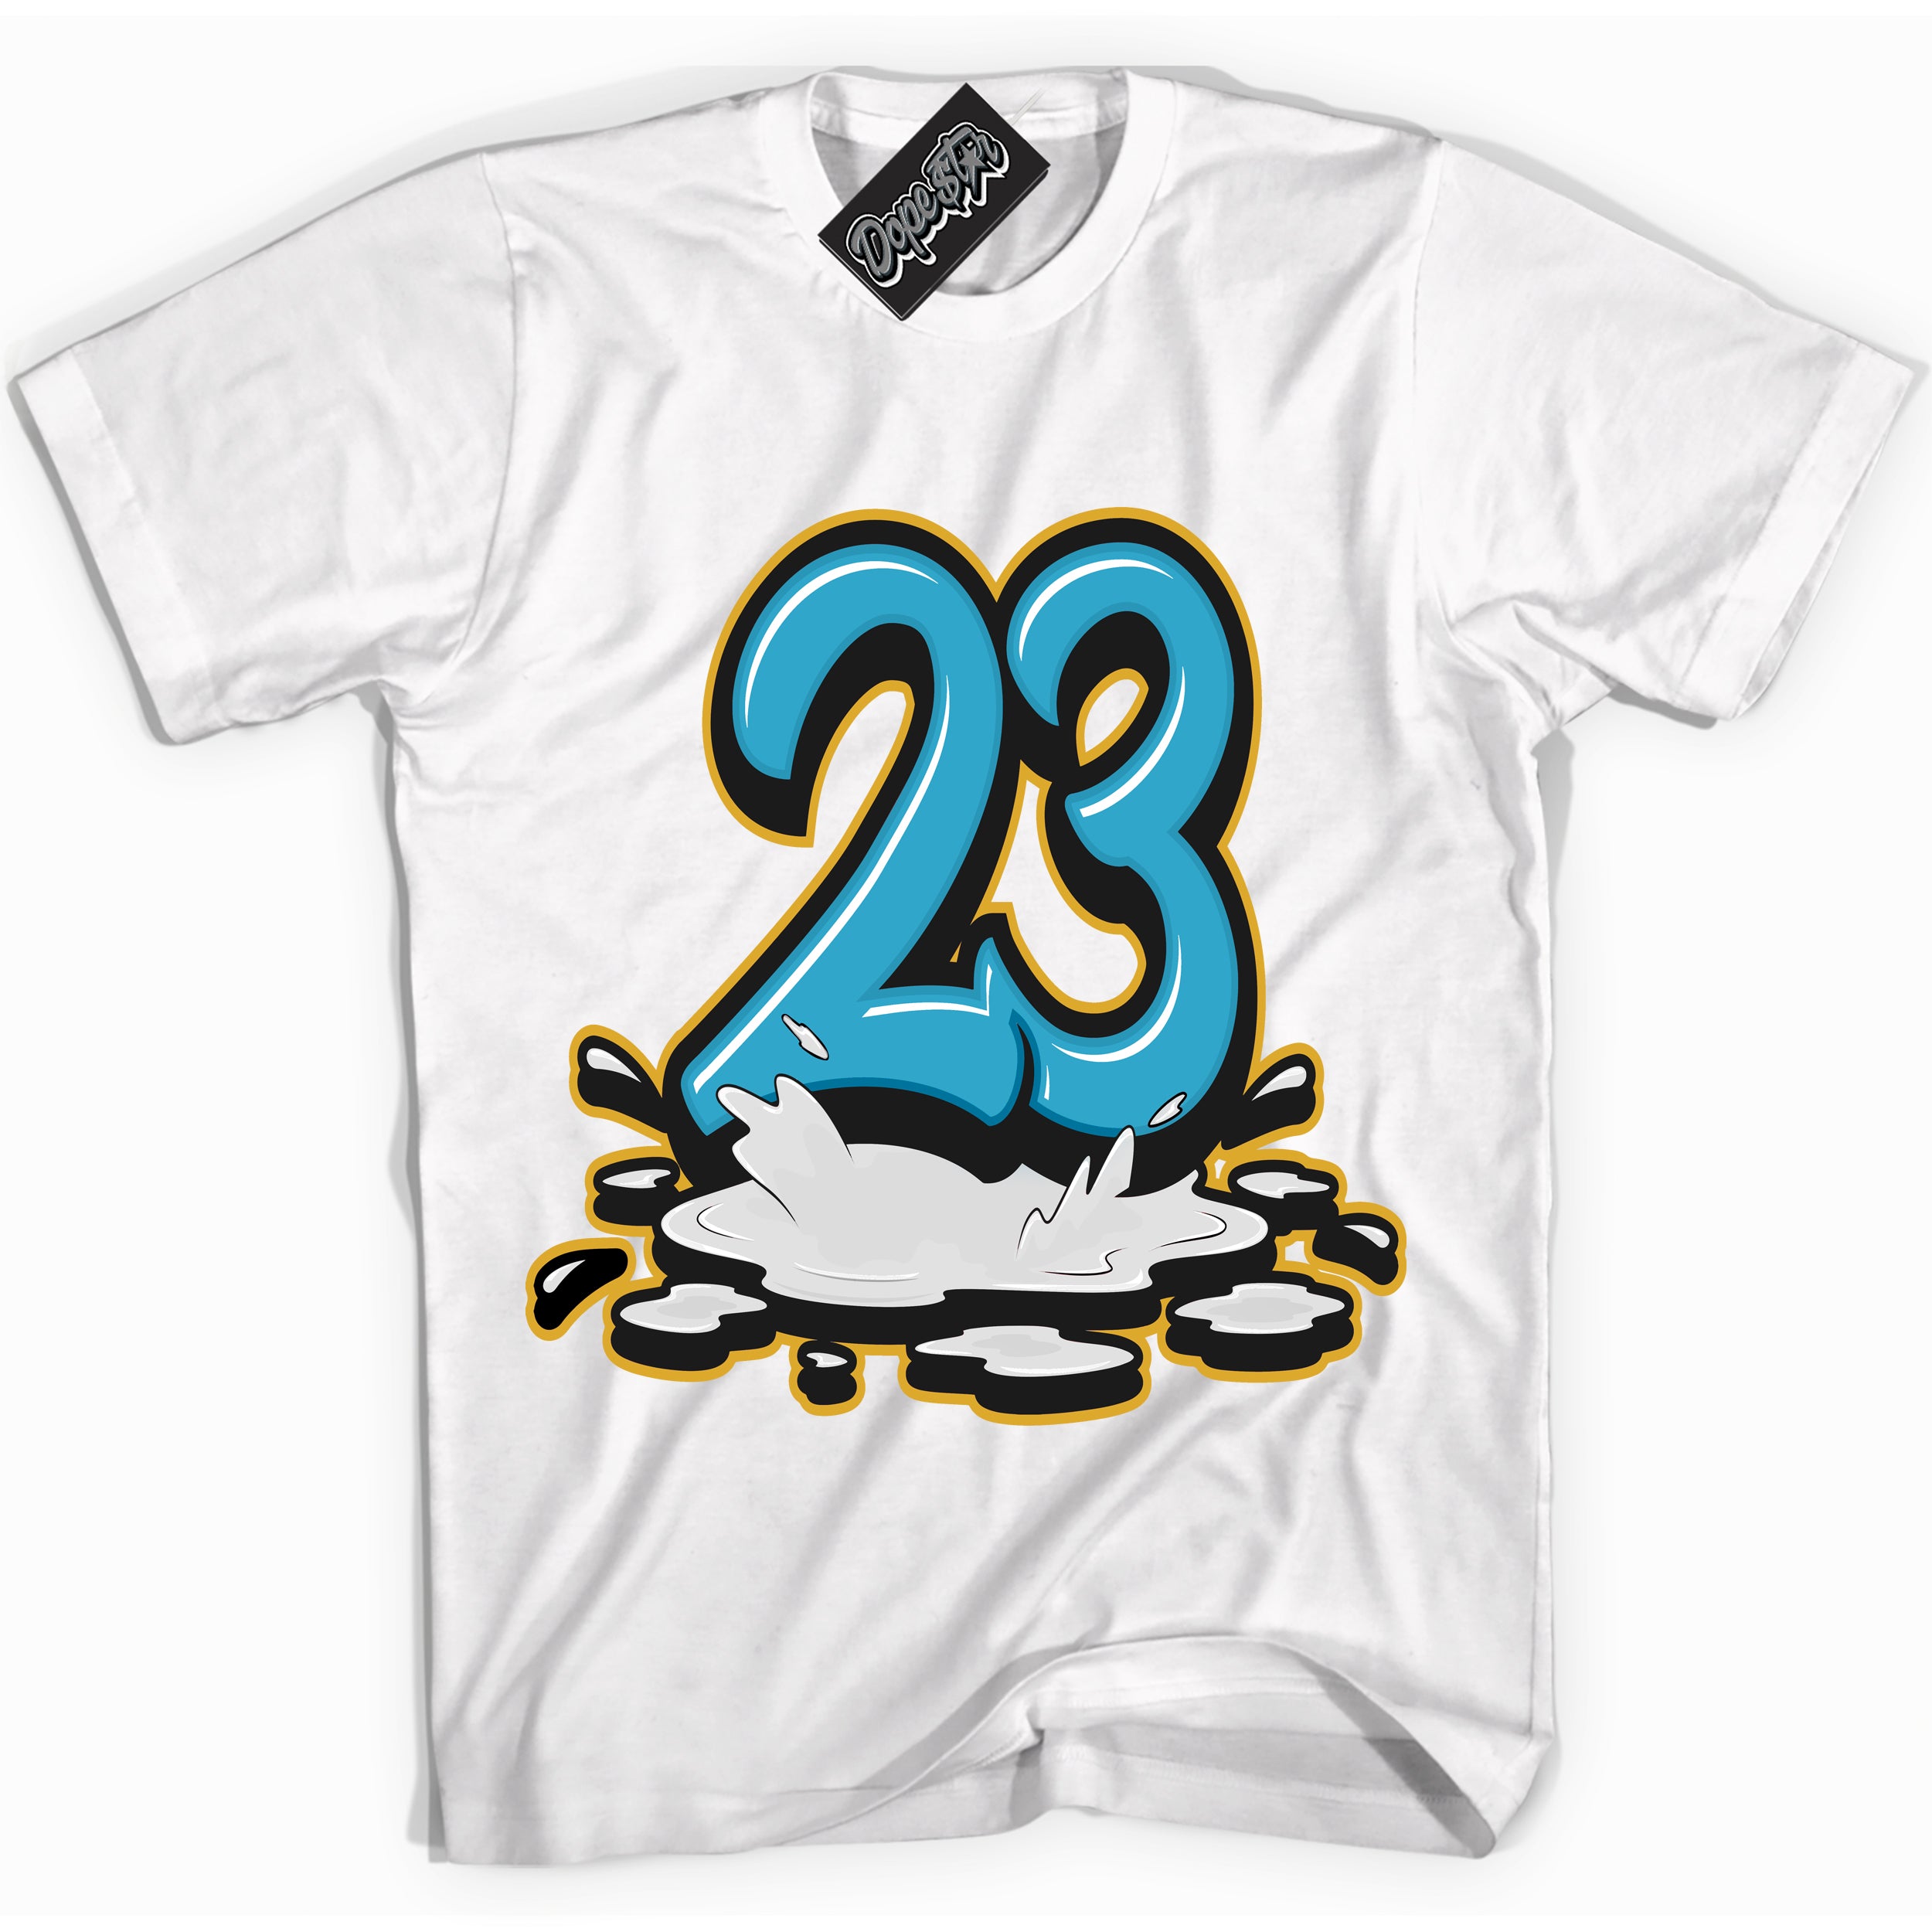 Cool White Shirt with “ 23 Melting” design that perfectly matches Aqua 5s Sneakers.